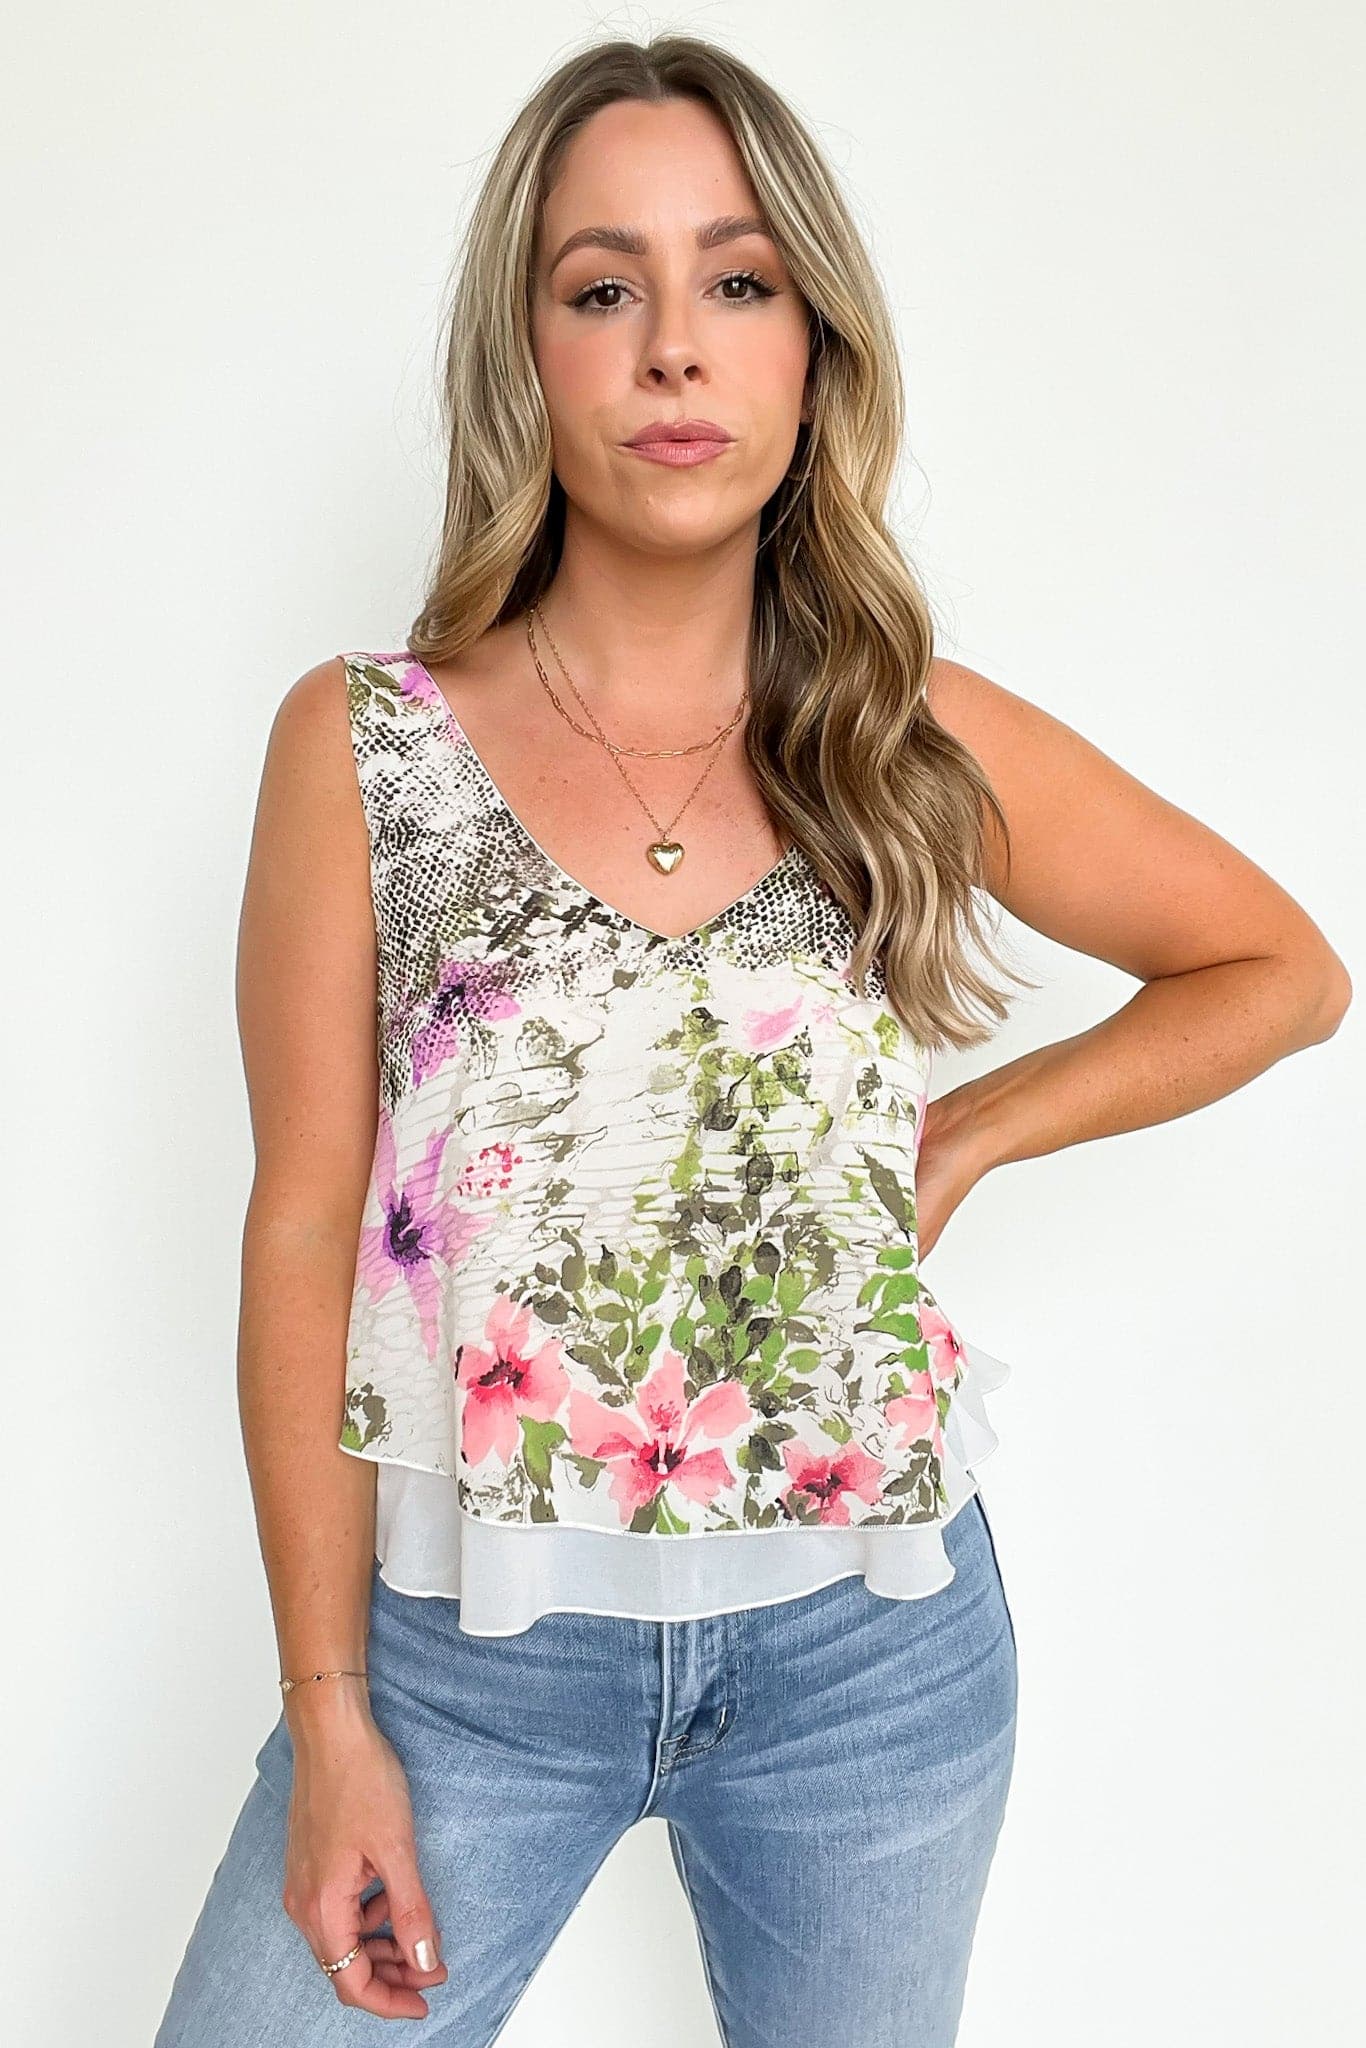  Lovely Entrance Flounce Floral Print Top - FINAL SALE - Madison and Mallory